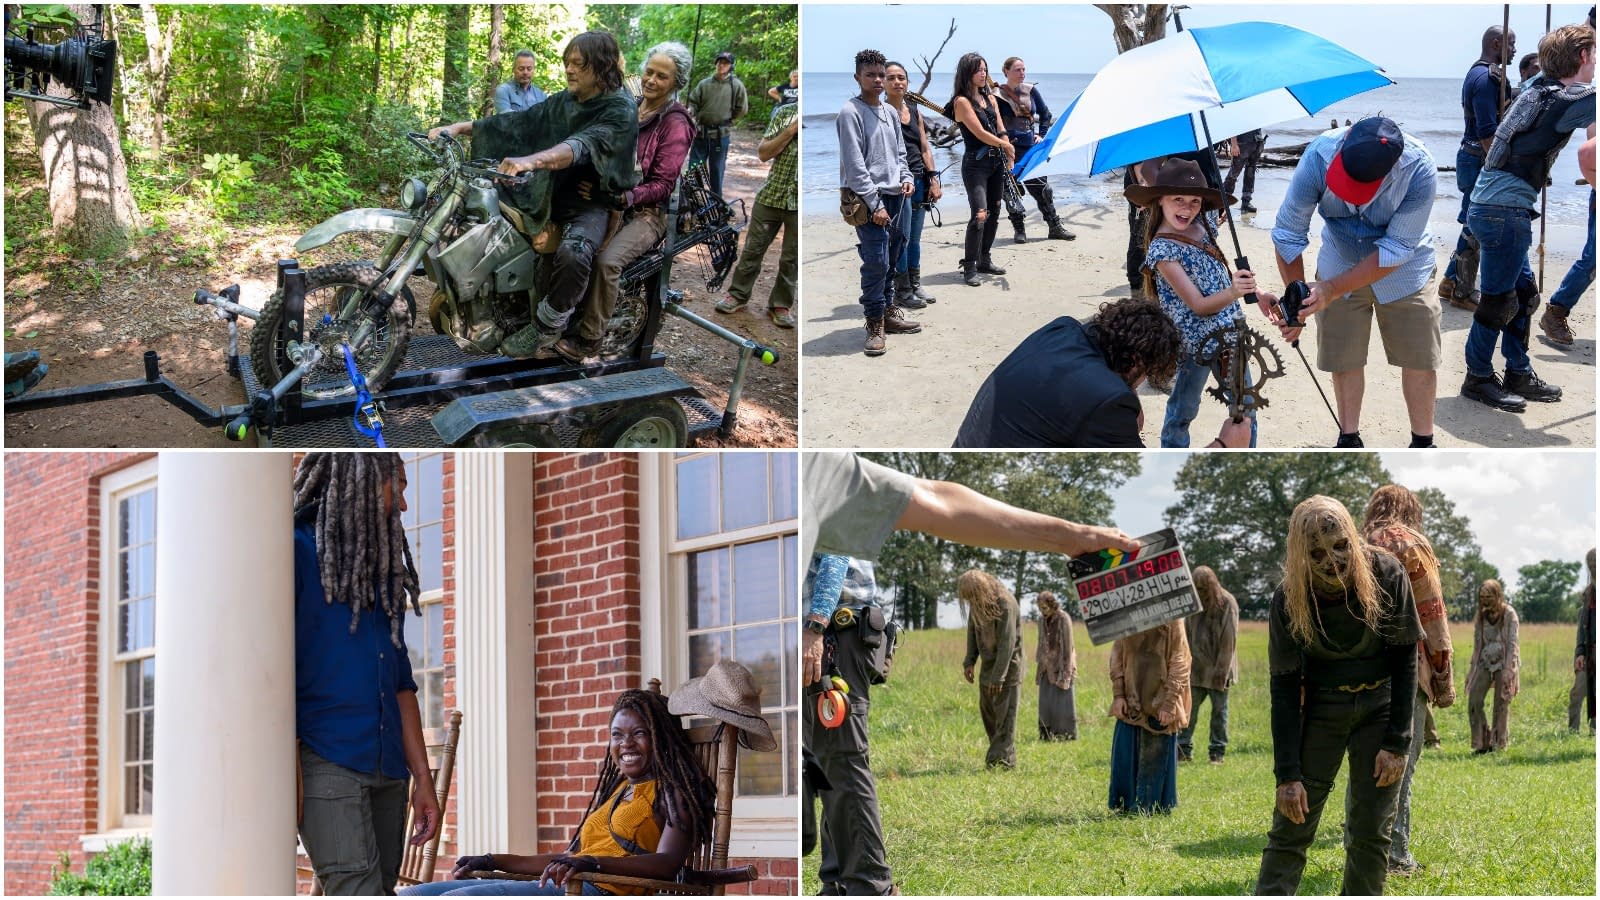 "The Walking Dead" Season 10: Enjoy These Behind-the-Scenes Moments [PREVIEW]